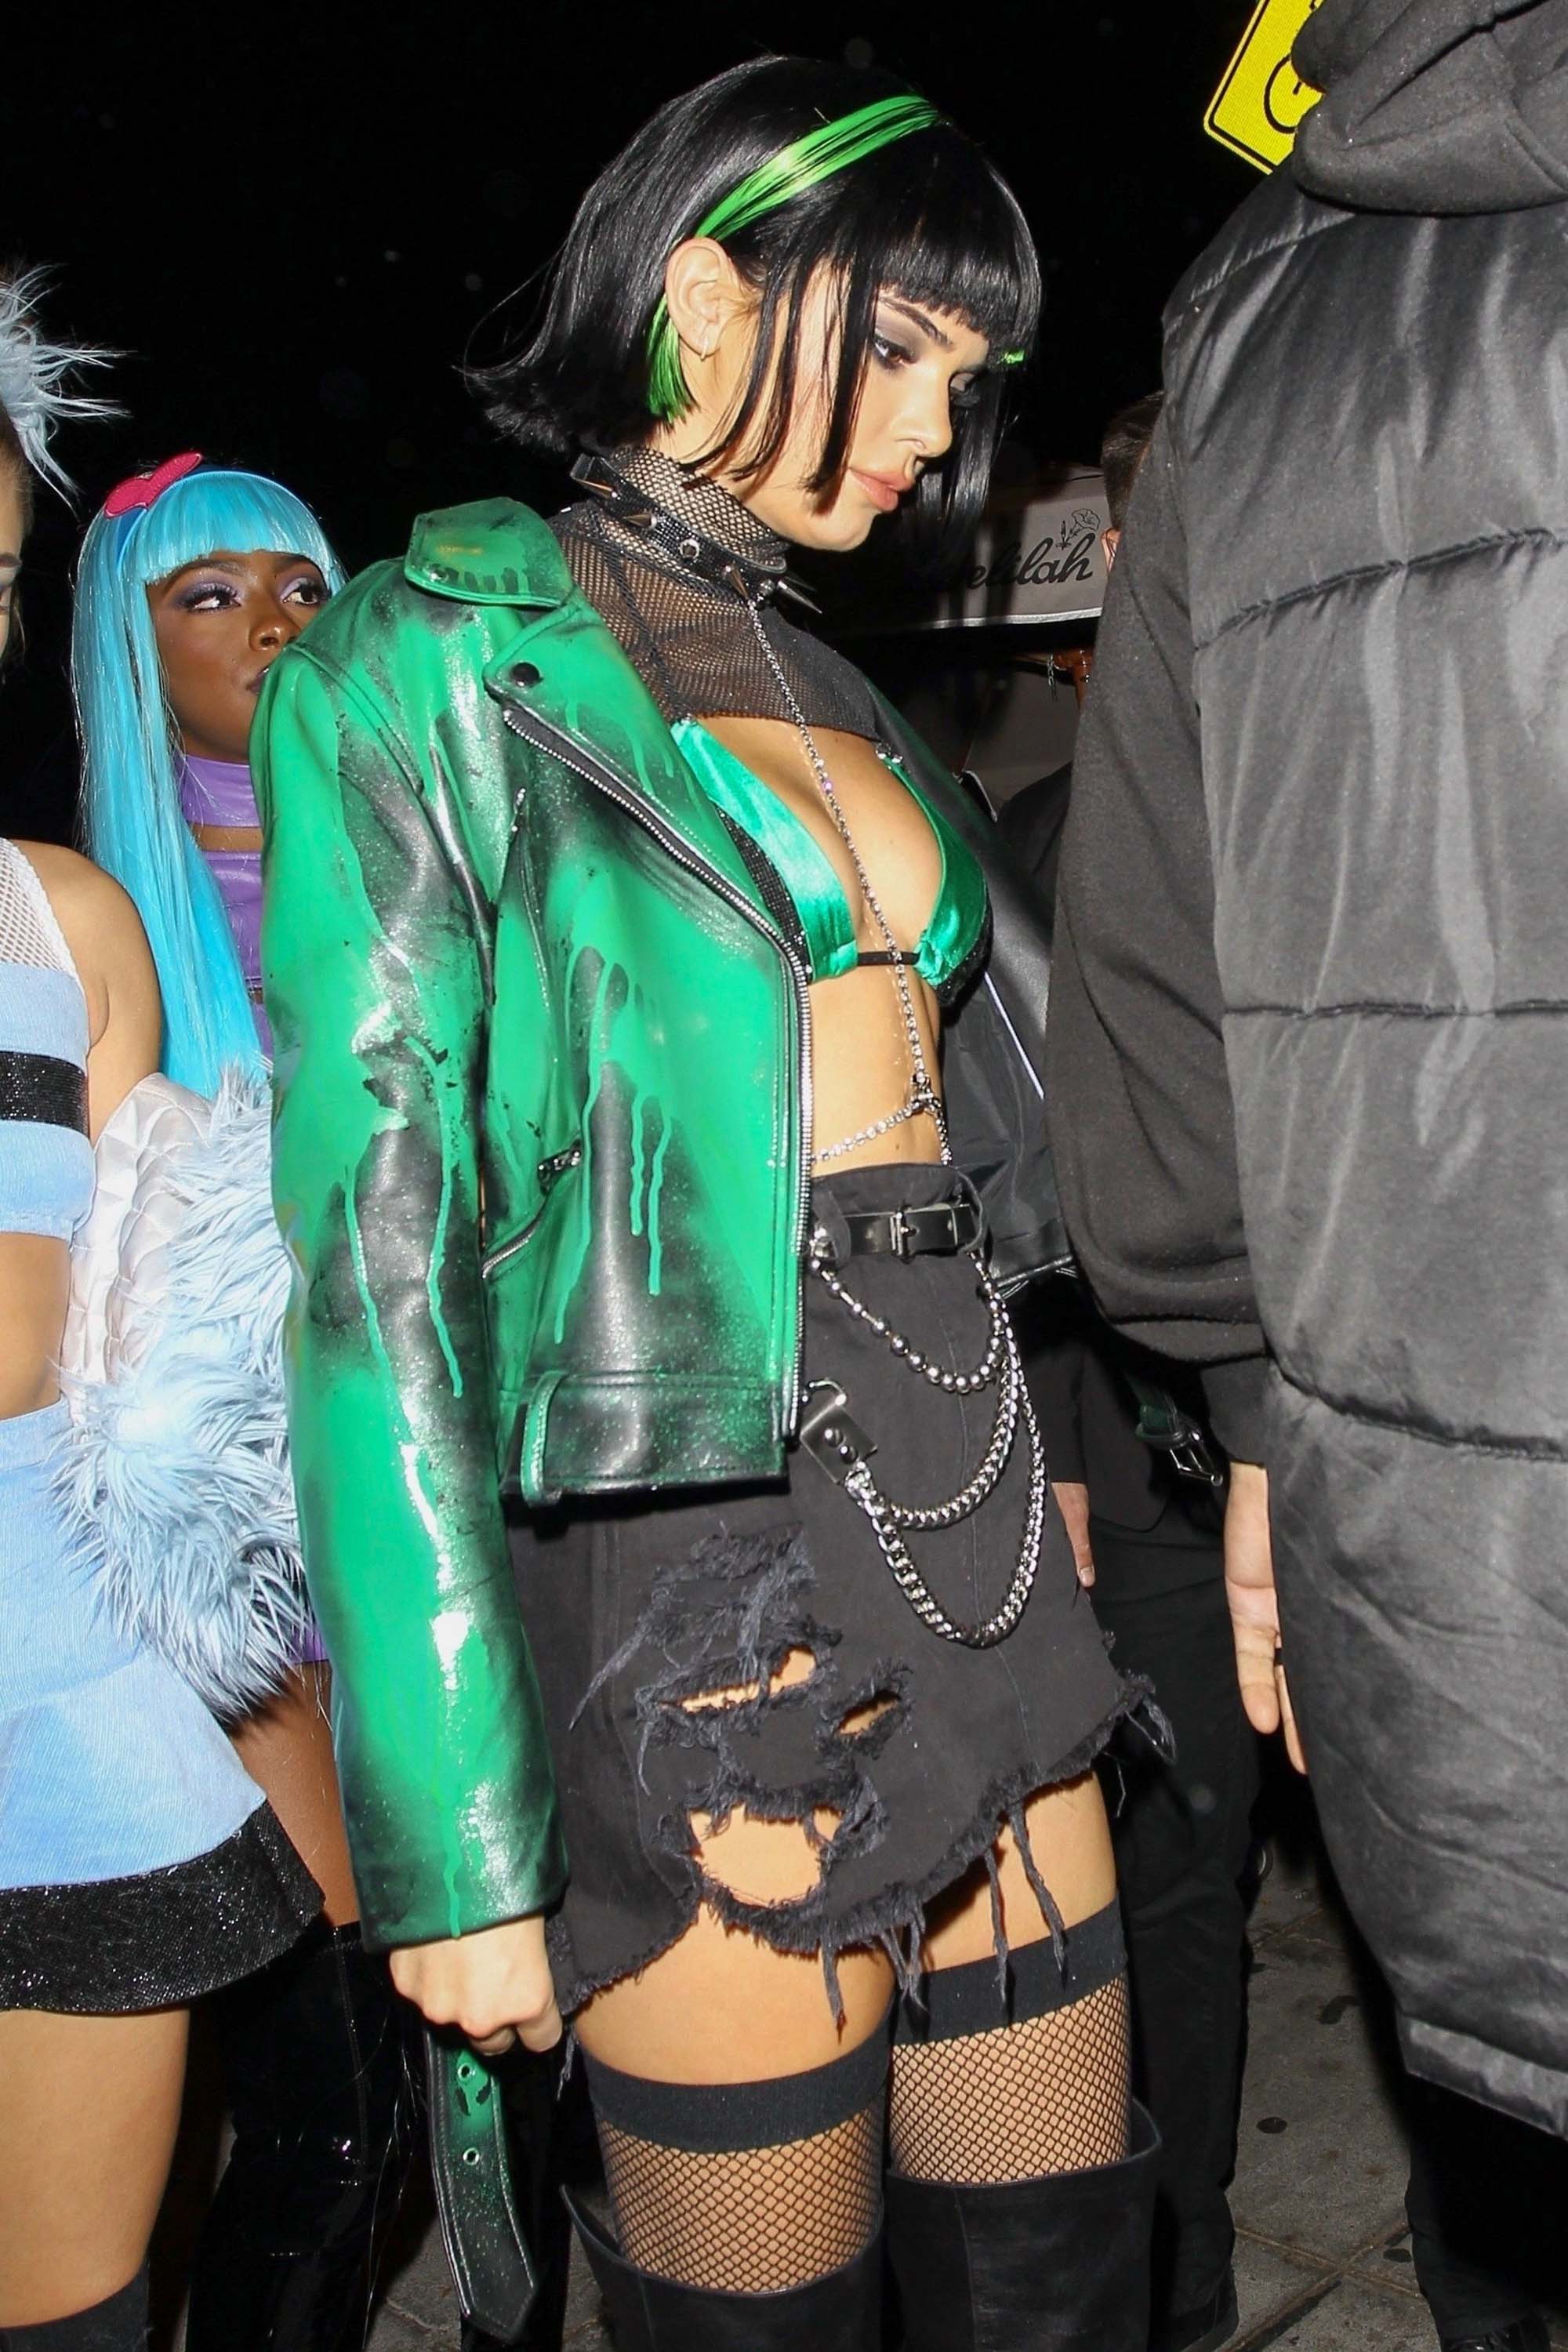 Kendall Jenner attends a Halloween party